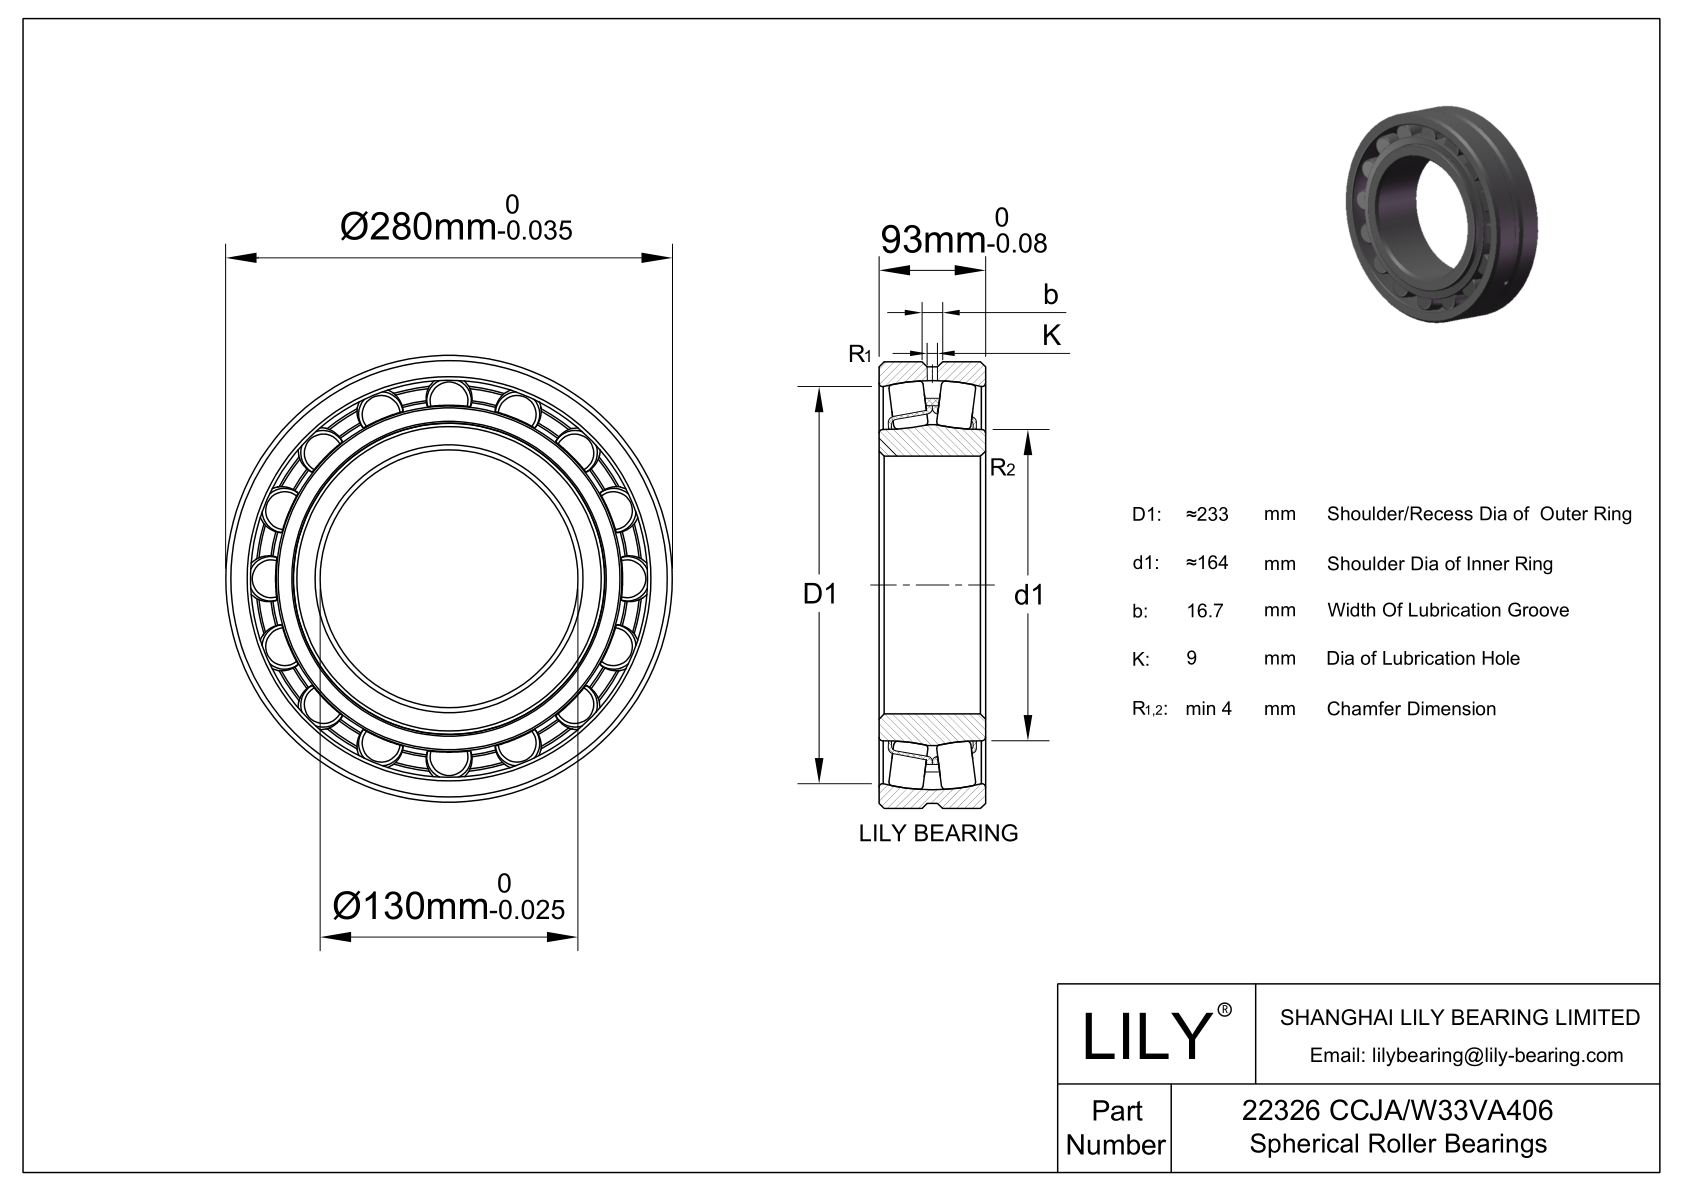 22326 CCJA/W33VA406 Double Row Spherical Roller Bearing cad drawing